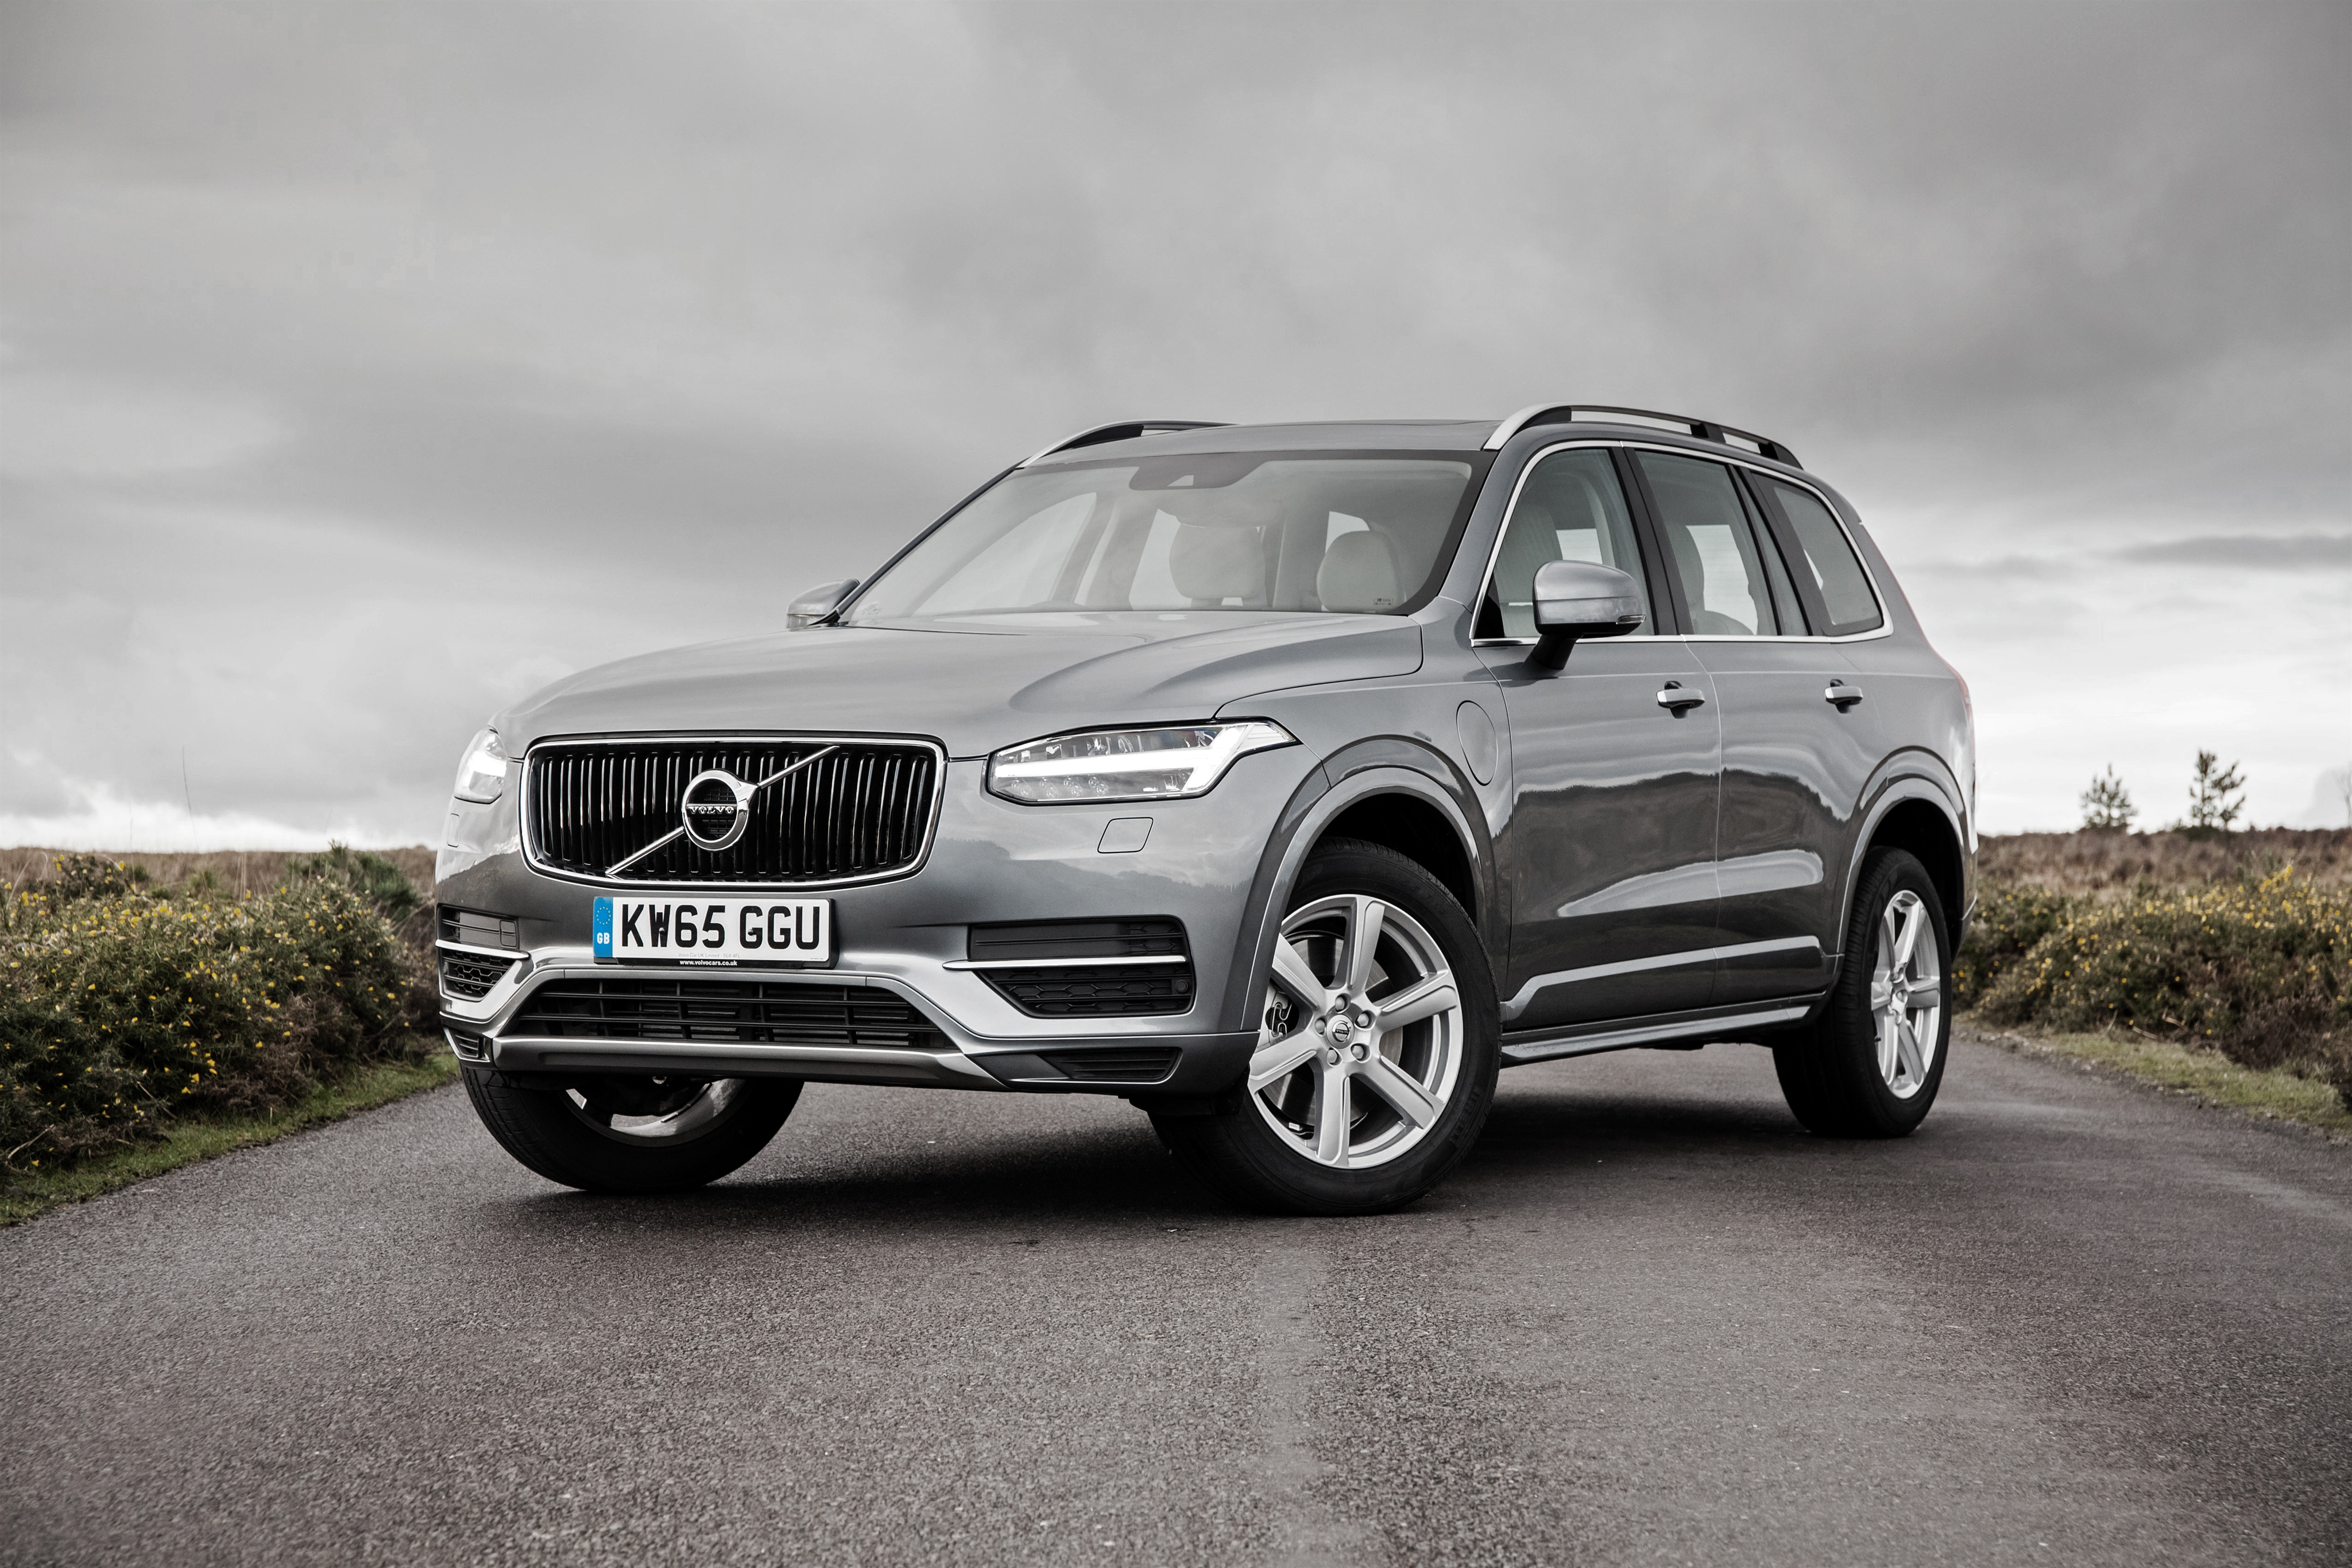 volvo, cars, side view, silver, silvery, xc90 iphone wallpaper